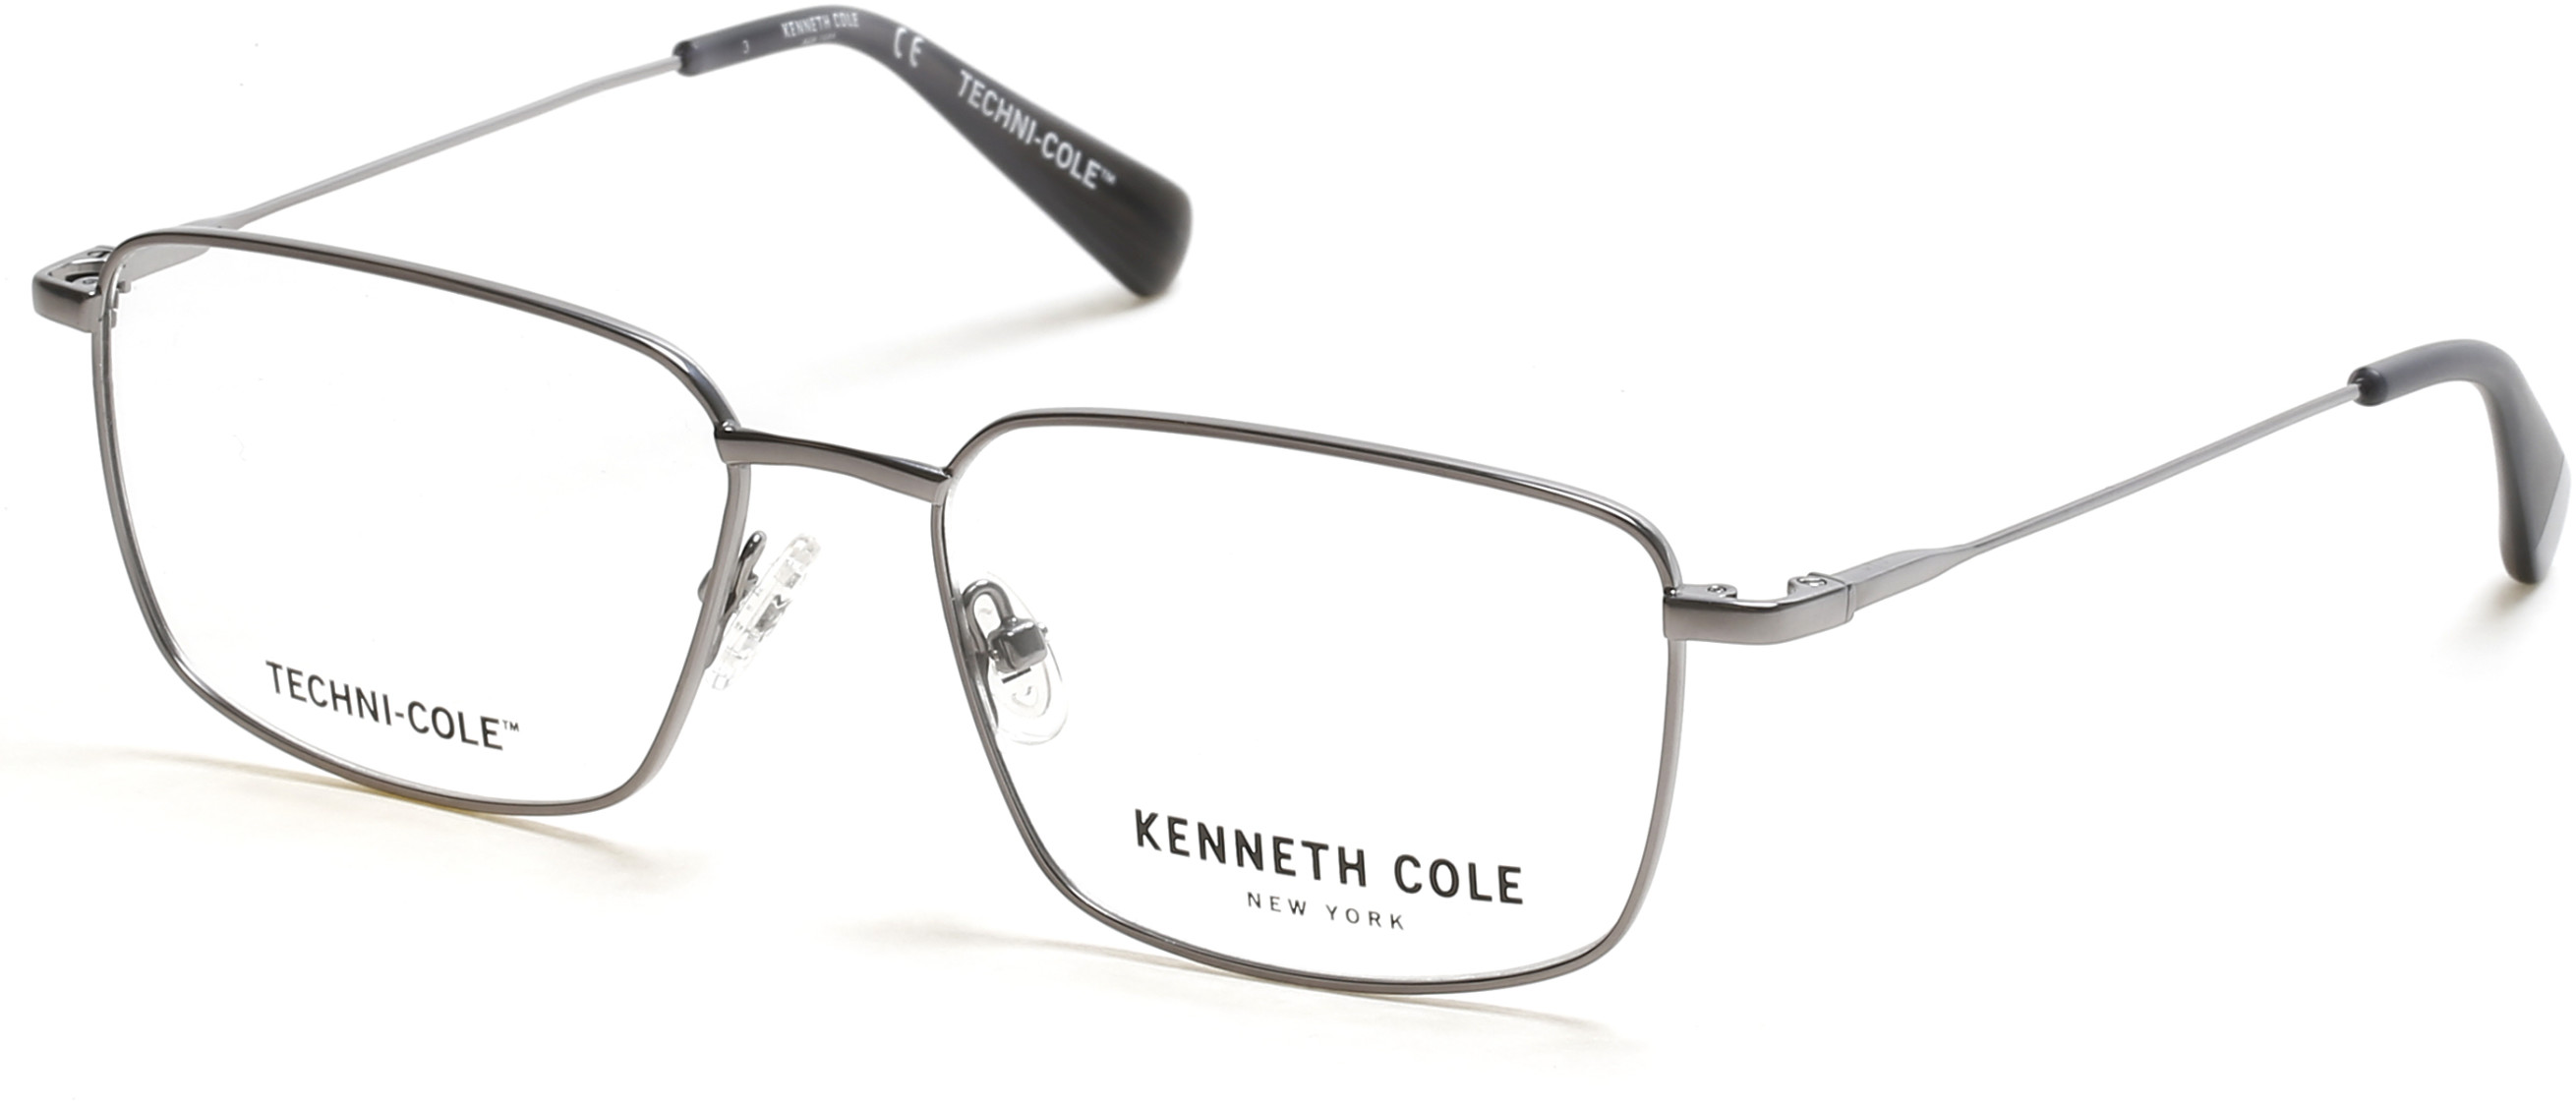 KENNETH COLE NY 0331 009